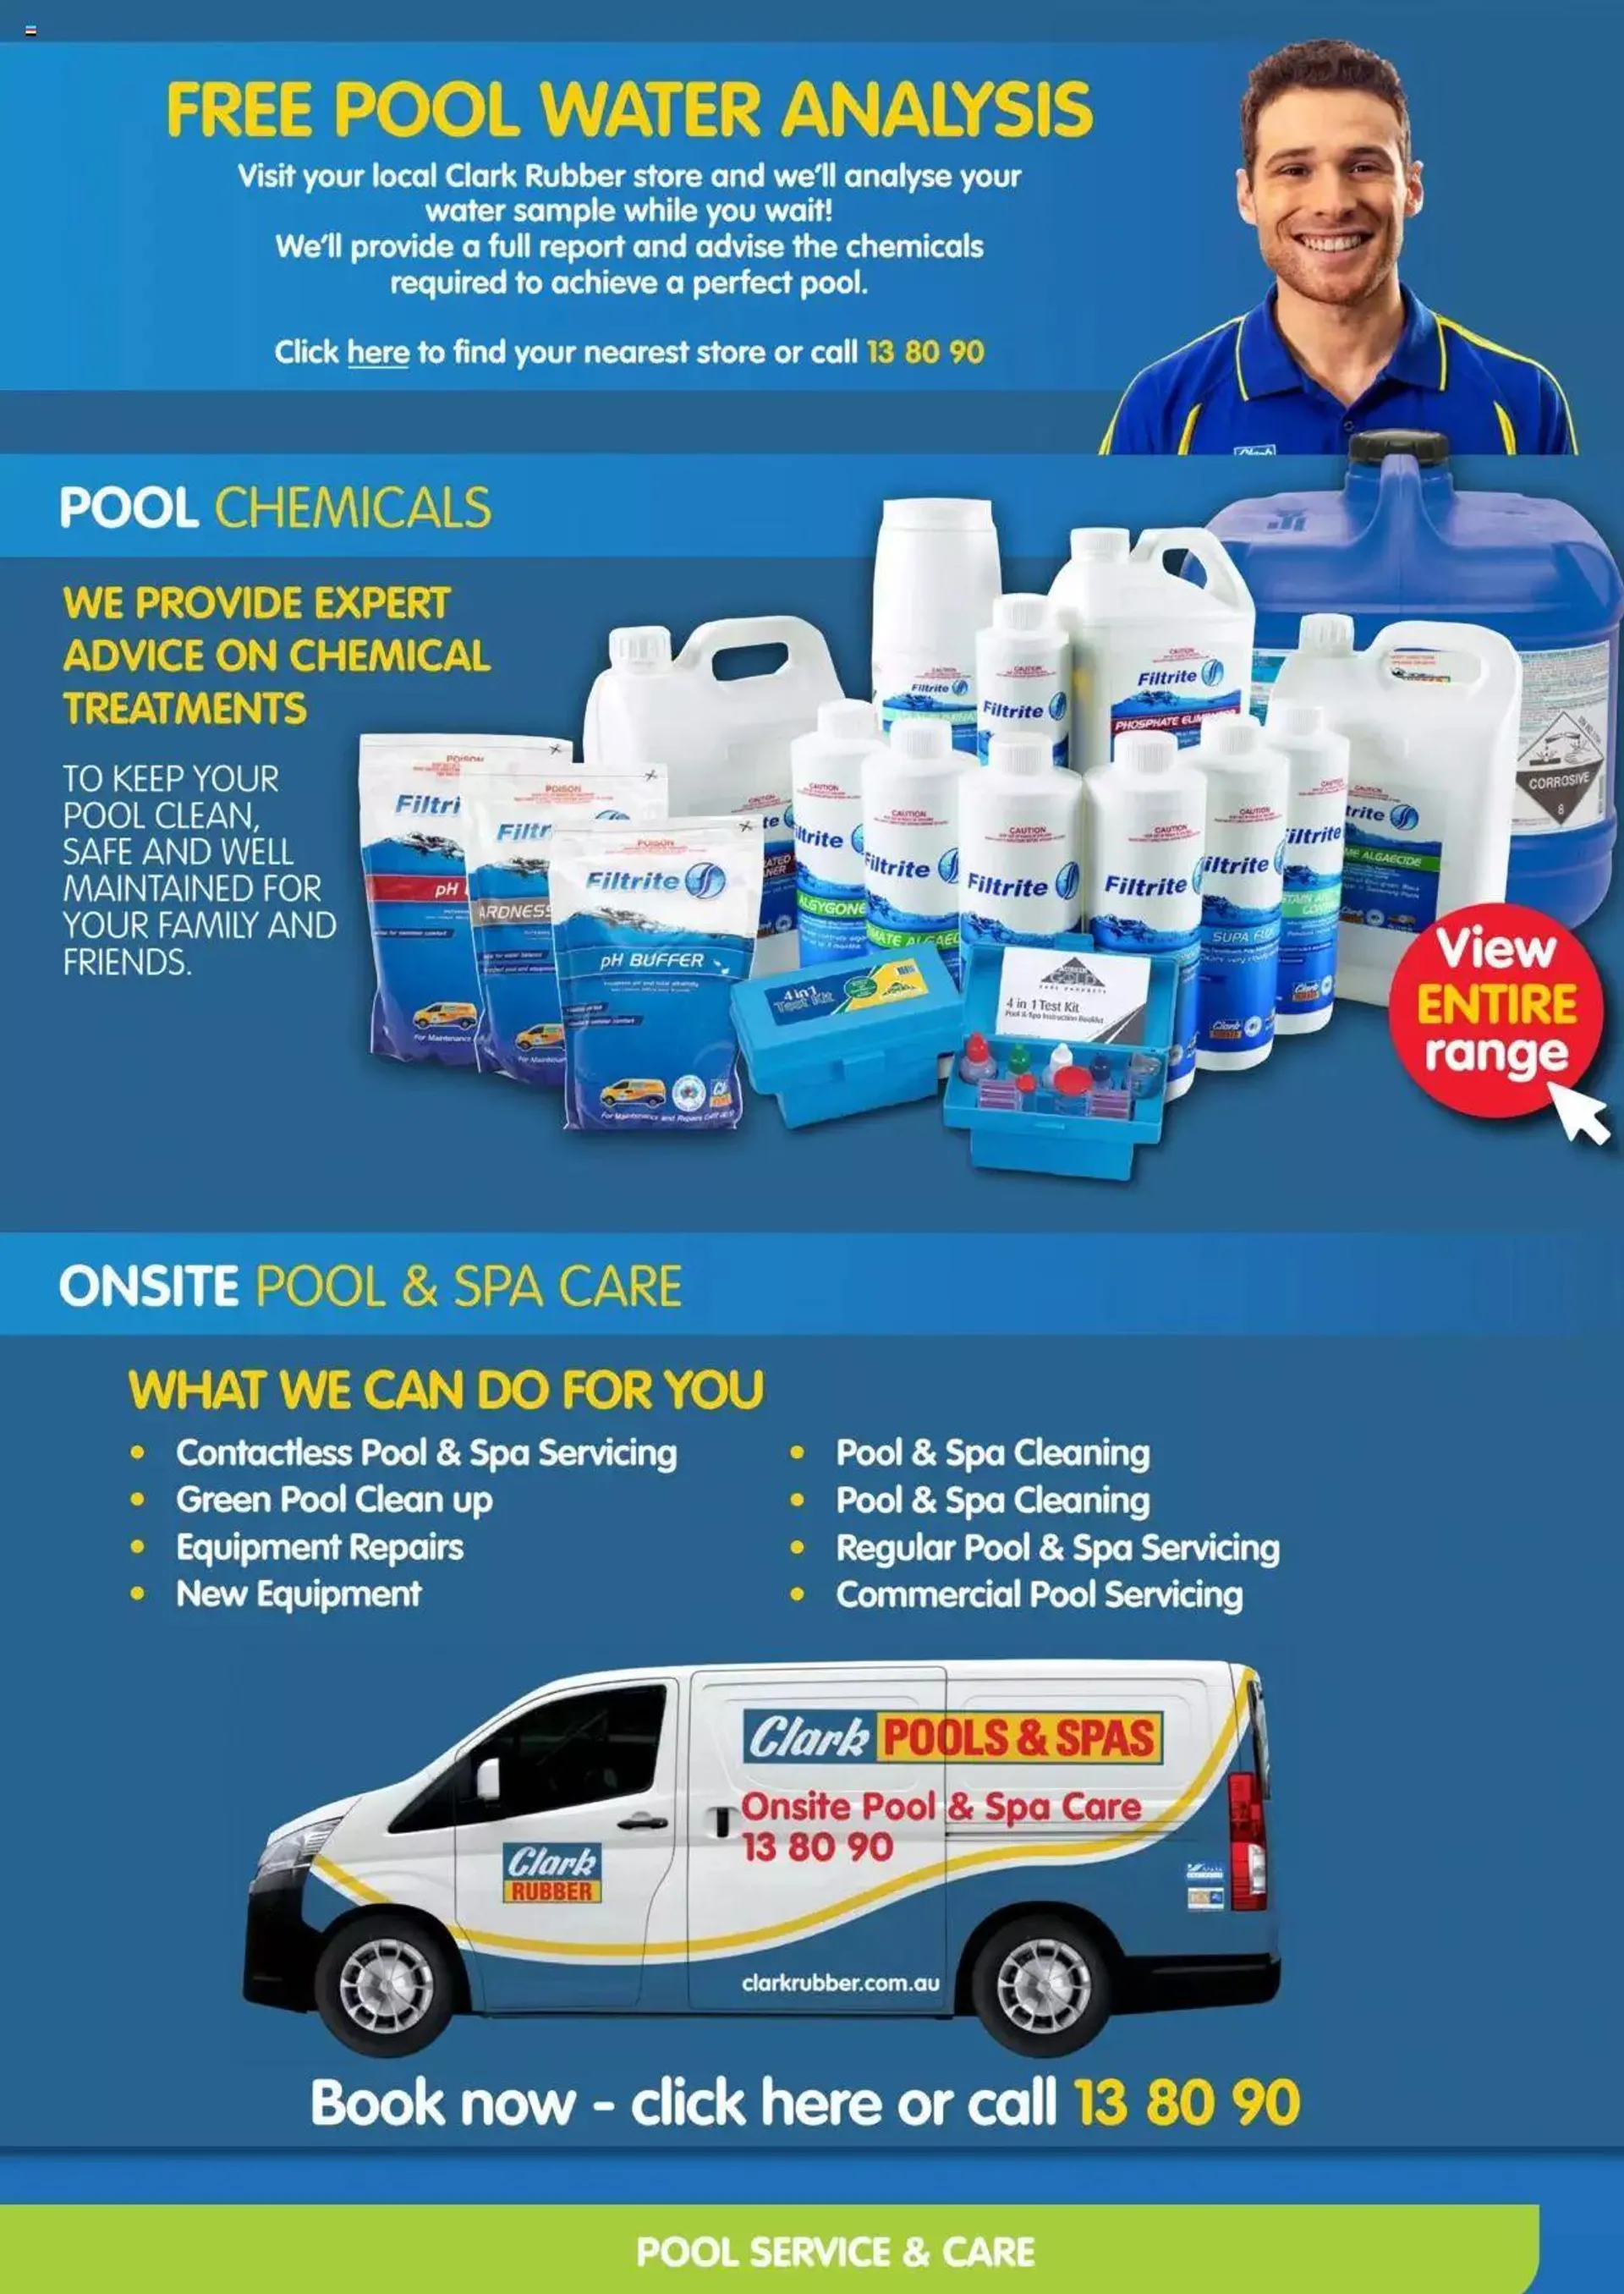 Clark Rubber - Your Pool Specialists - 13